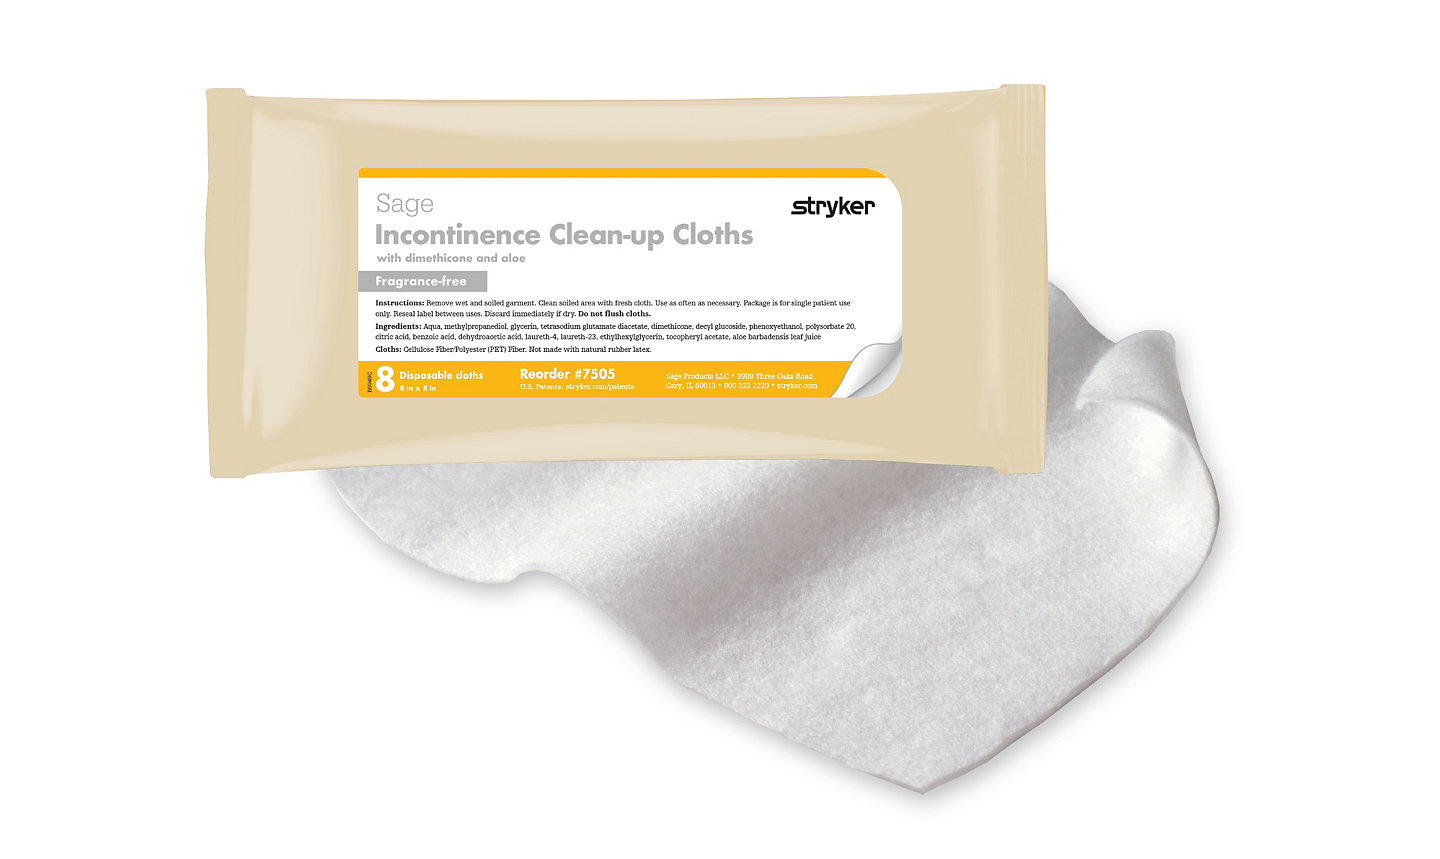 Sage incontinence clean up cloths help hospitals with their incontinence care strategy